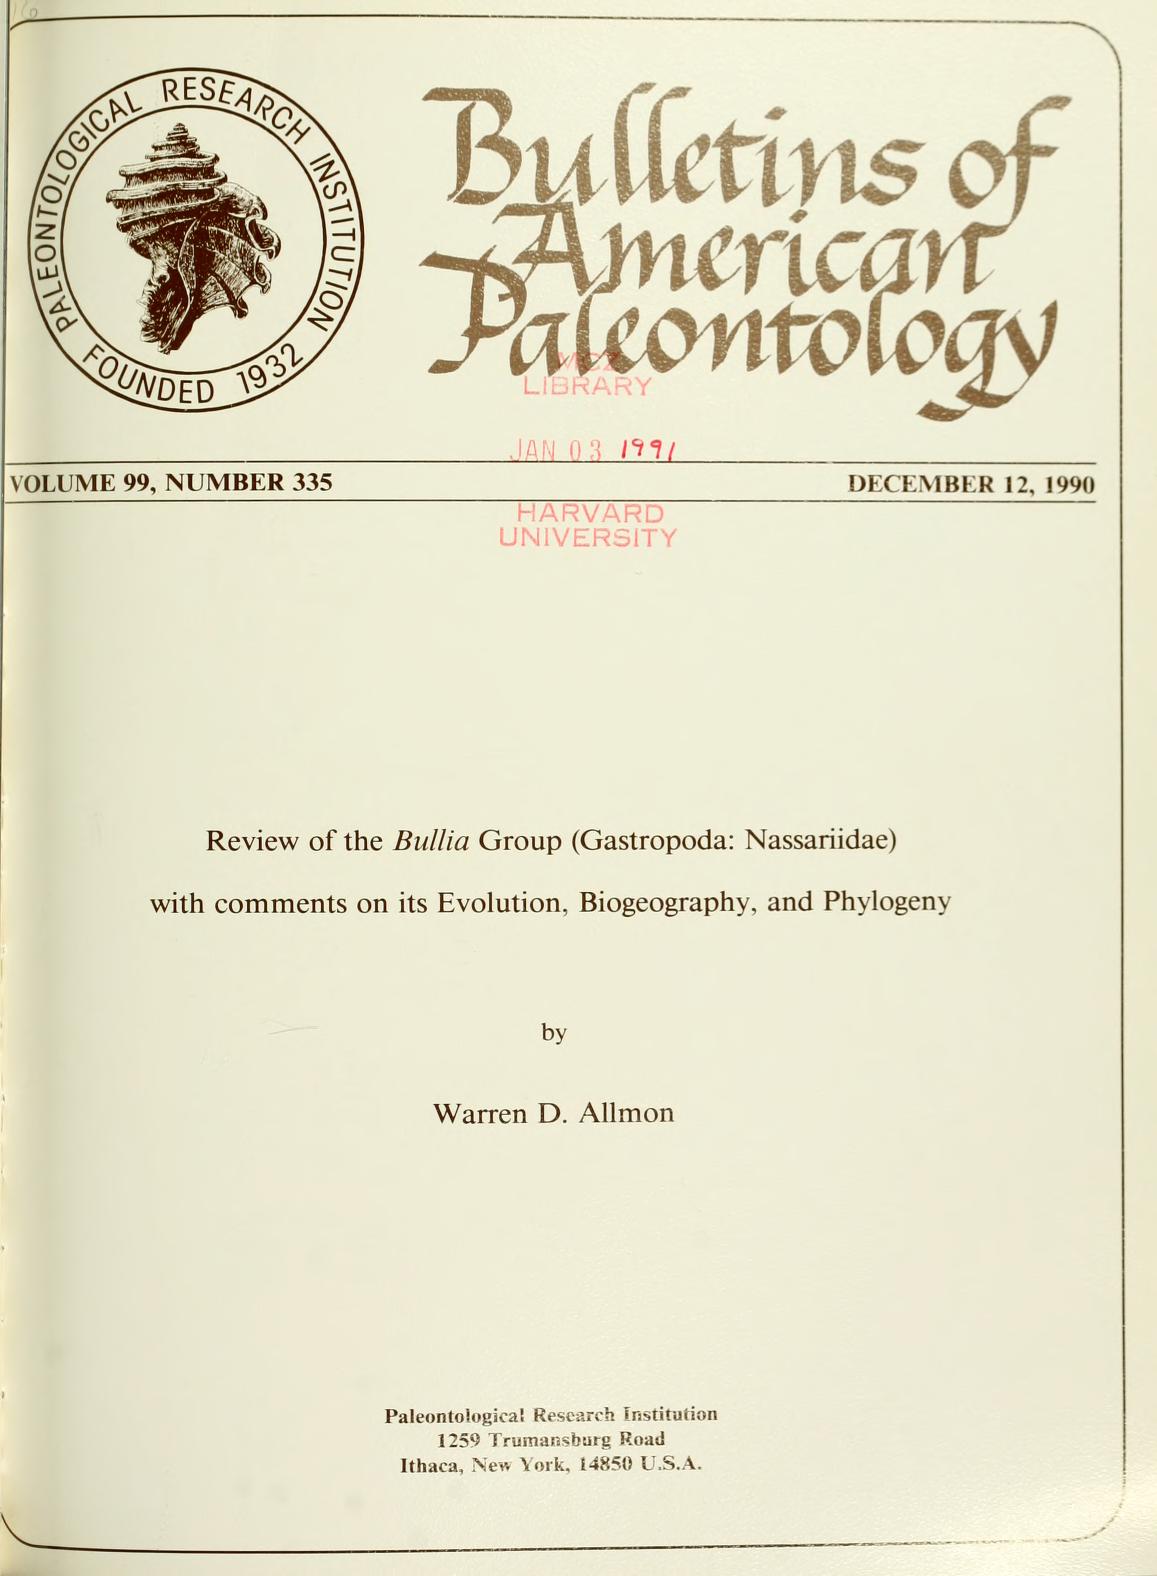 Media of type text, Allmon 1990. Description:Review of the <i>Bullia </i>group (Gastropoda: Nassariidae) with comments on its evolution, biogeography, phylogeny